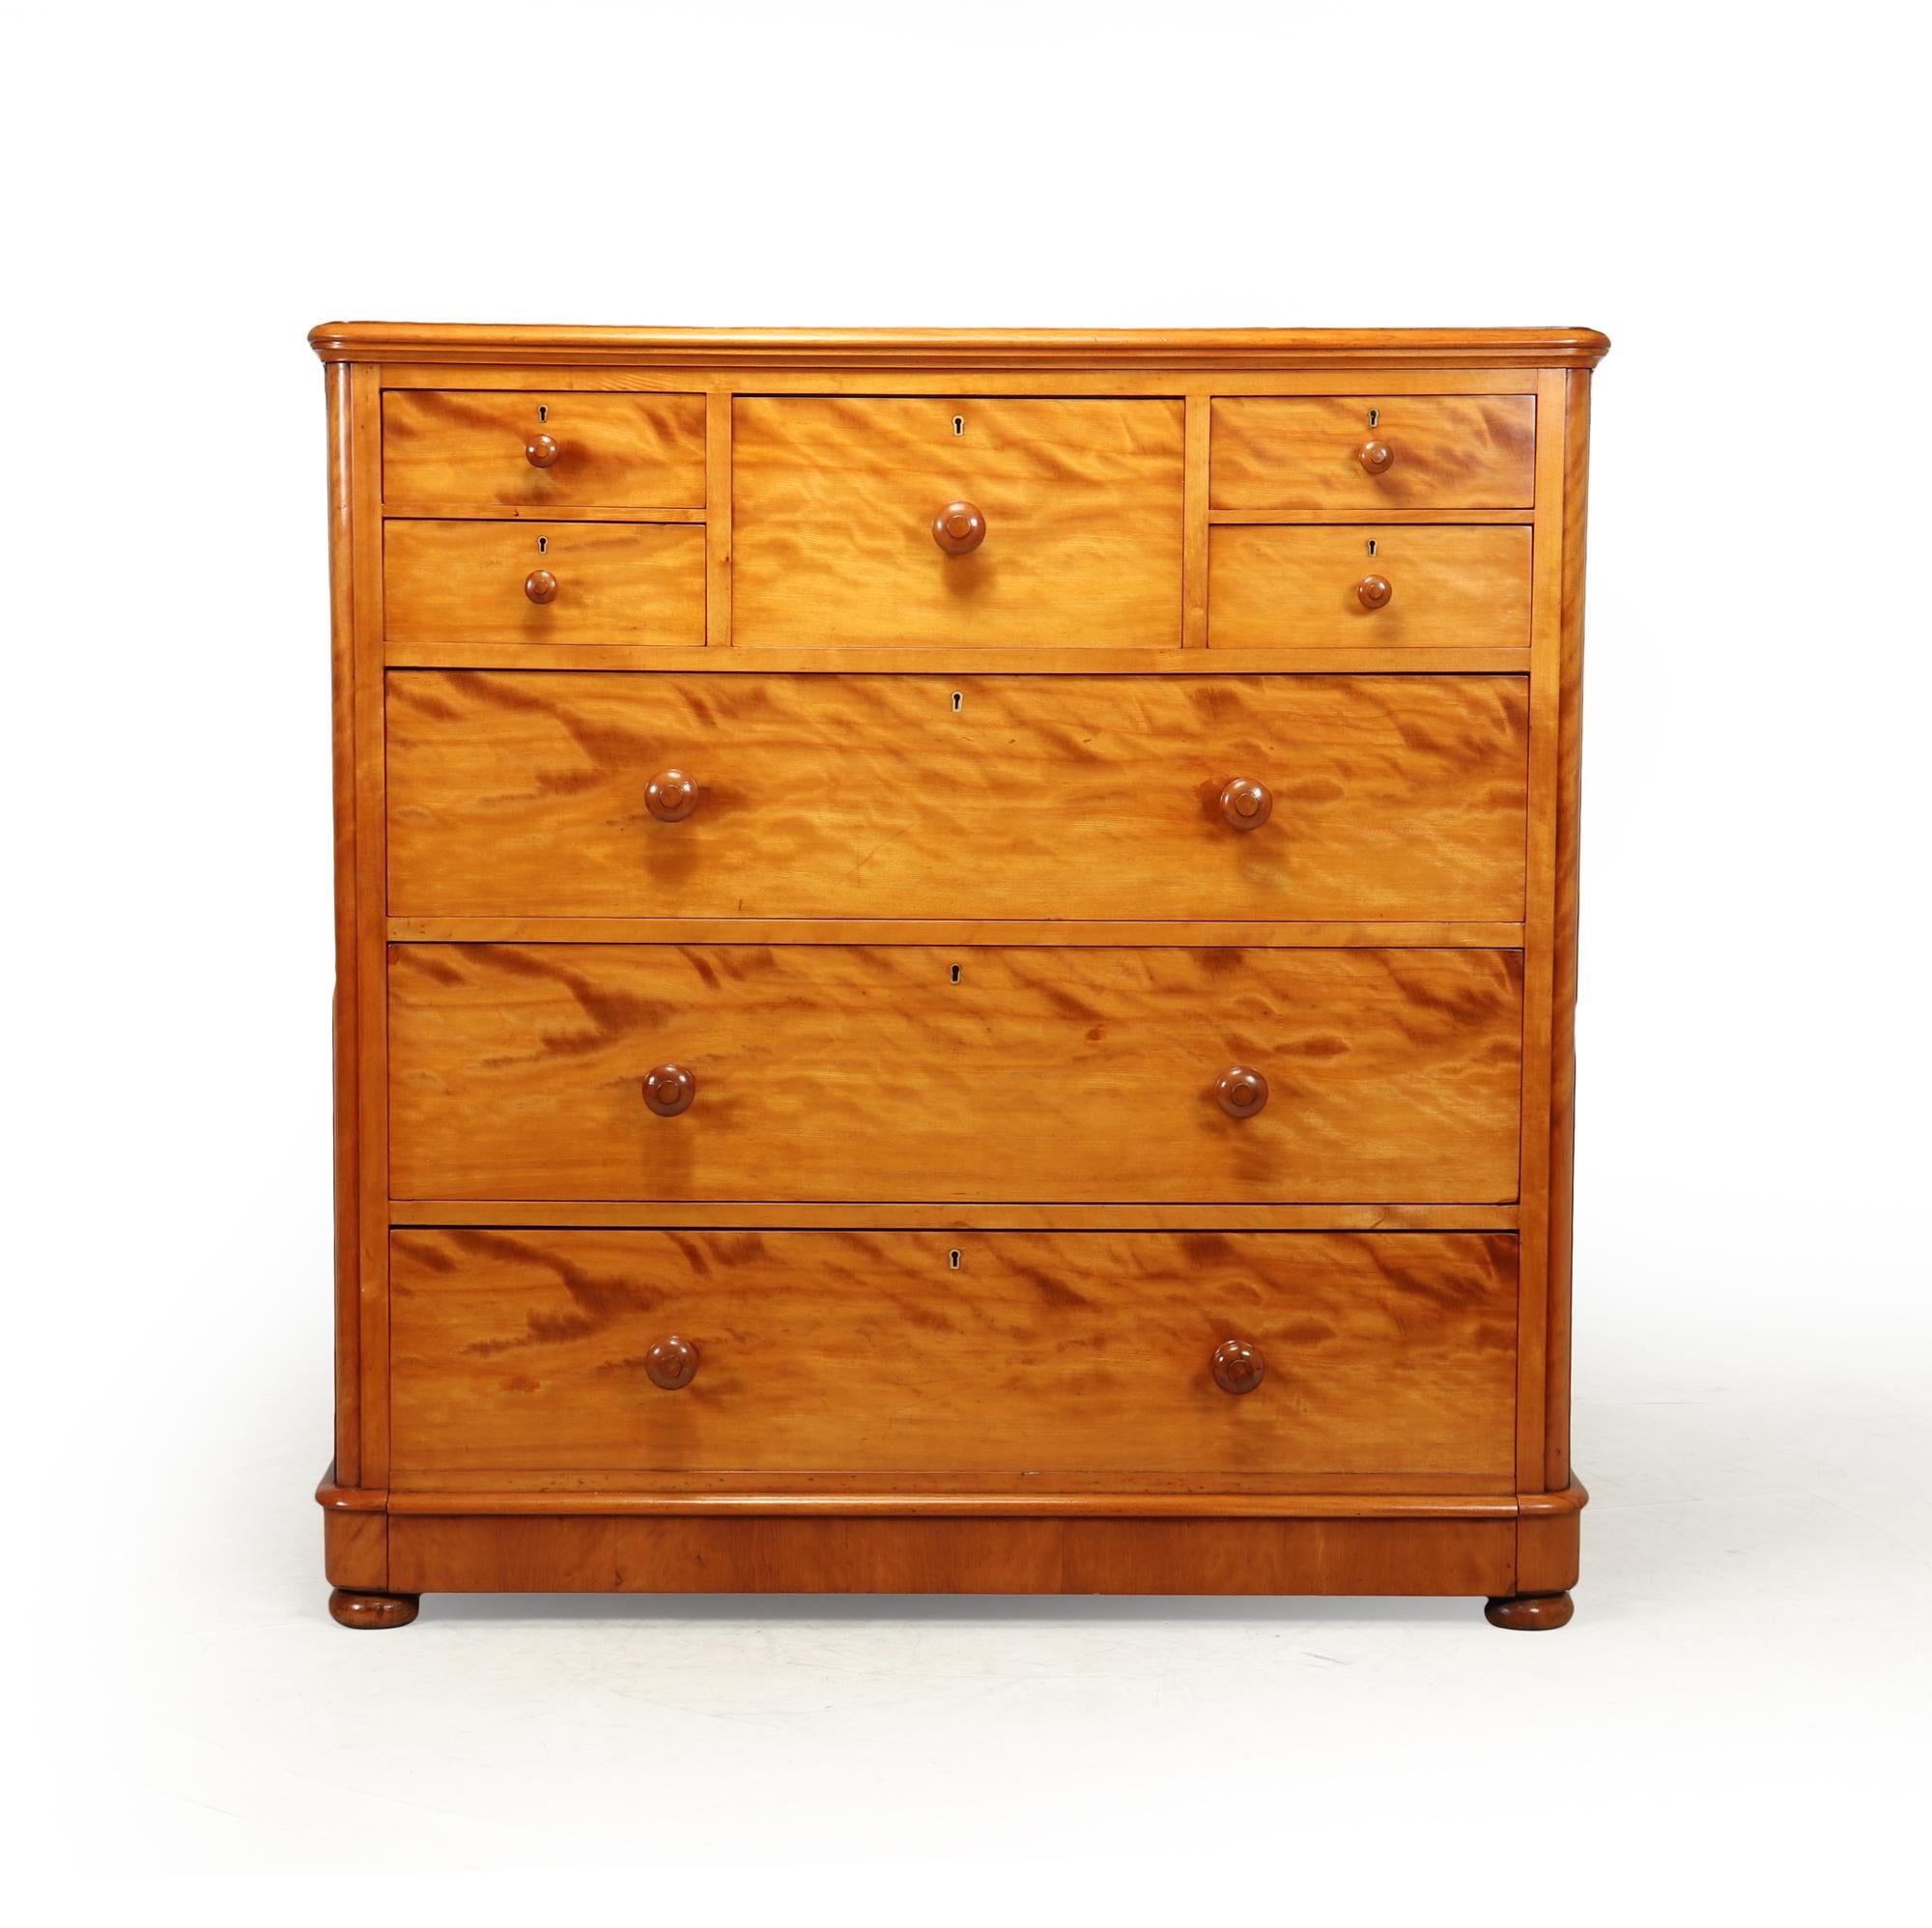 A substantial sized English chest of drawers circa 1870 in Satin Birch produced by Maple & Co. The top middle drawer is fully stamped Maple & Co. and all locks are stamped VR for Queen Victoria This chest is of rounded corner design, and gives a